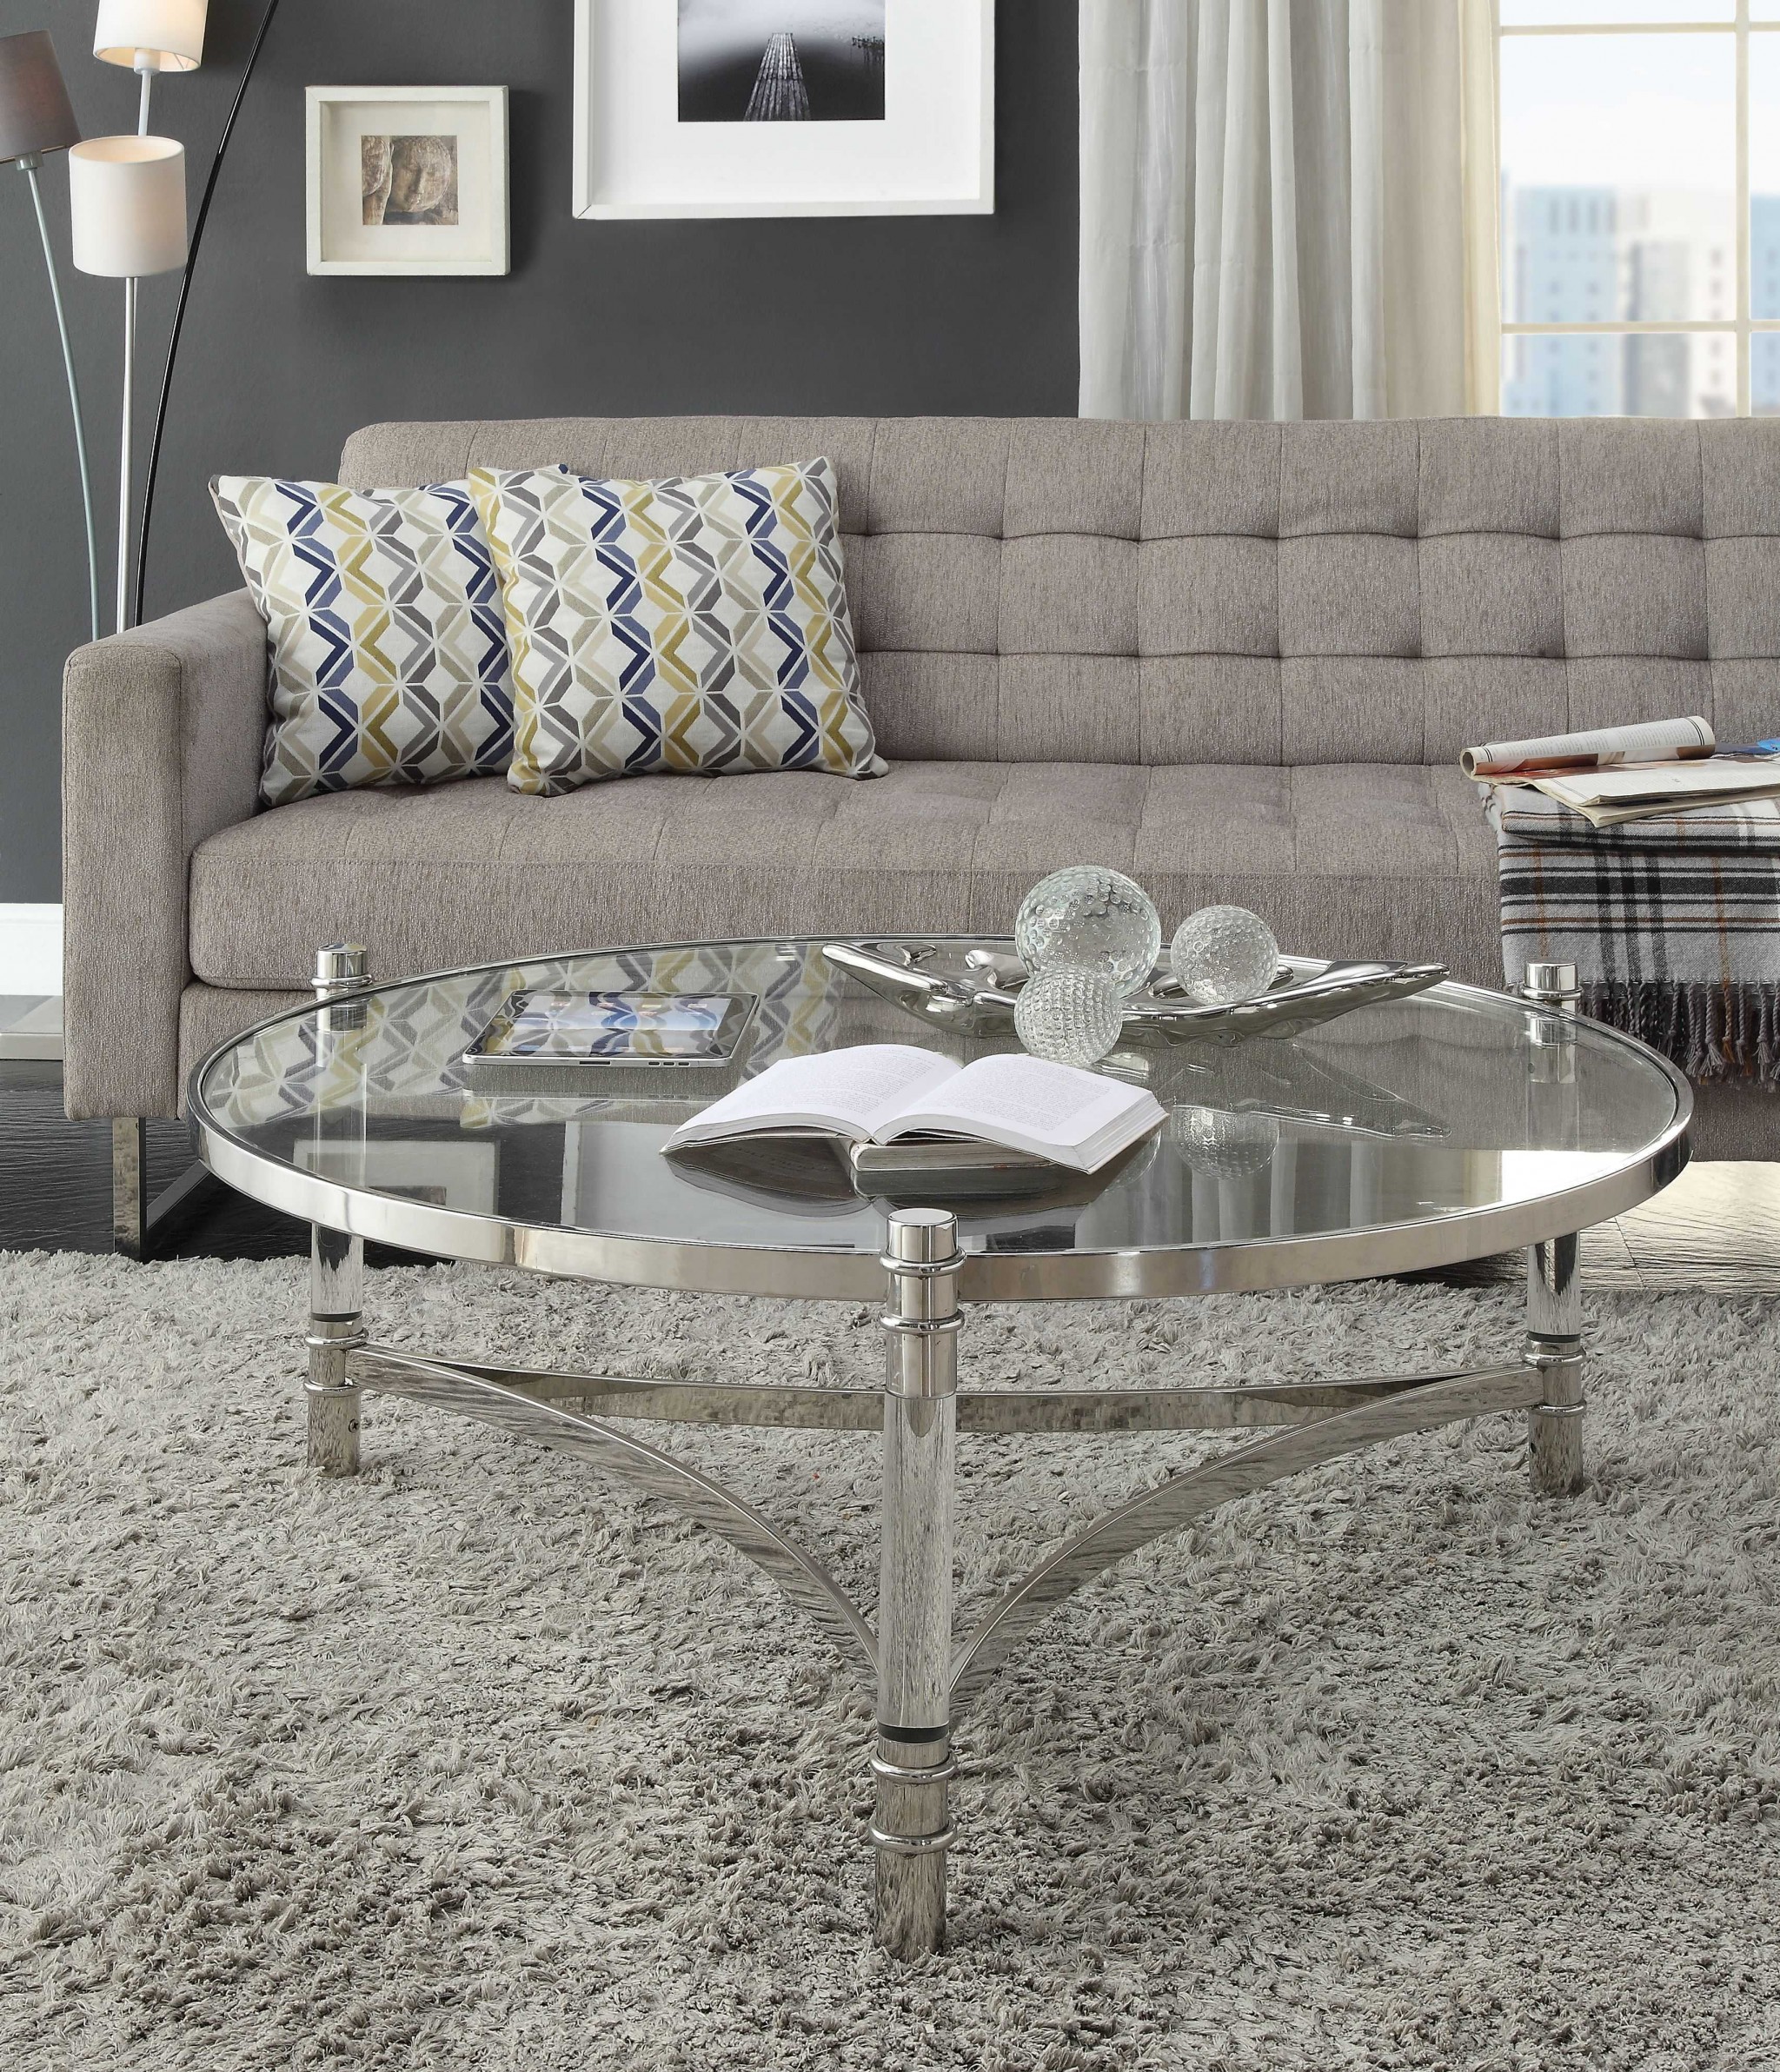 41" X 41" X 17" Clear Acrylic, Stainless Steel And Clear Glass Coffee Table